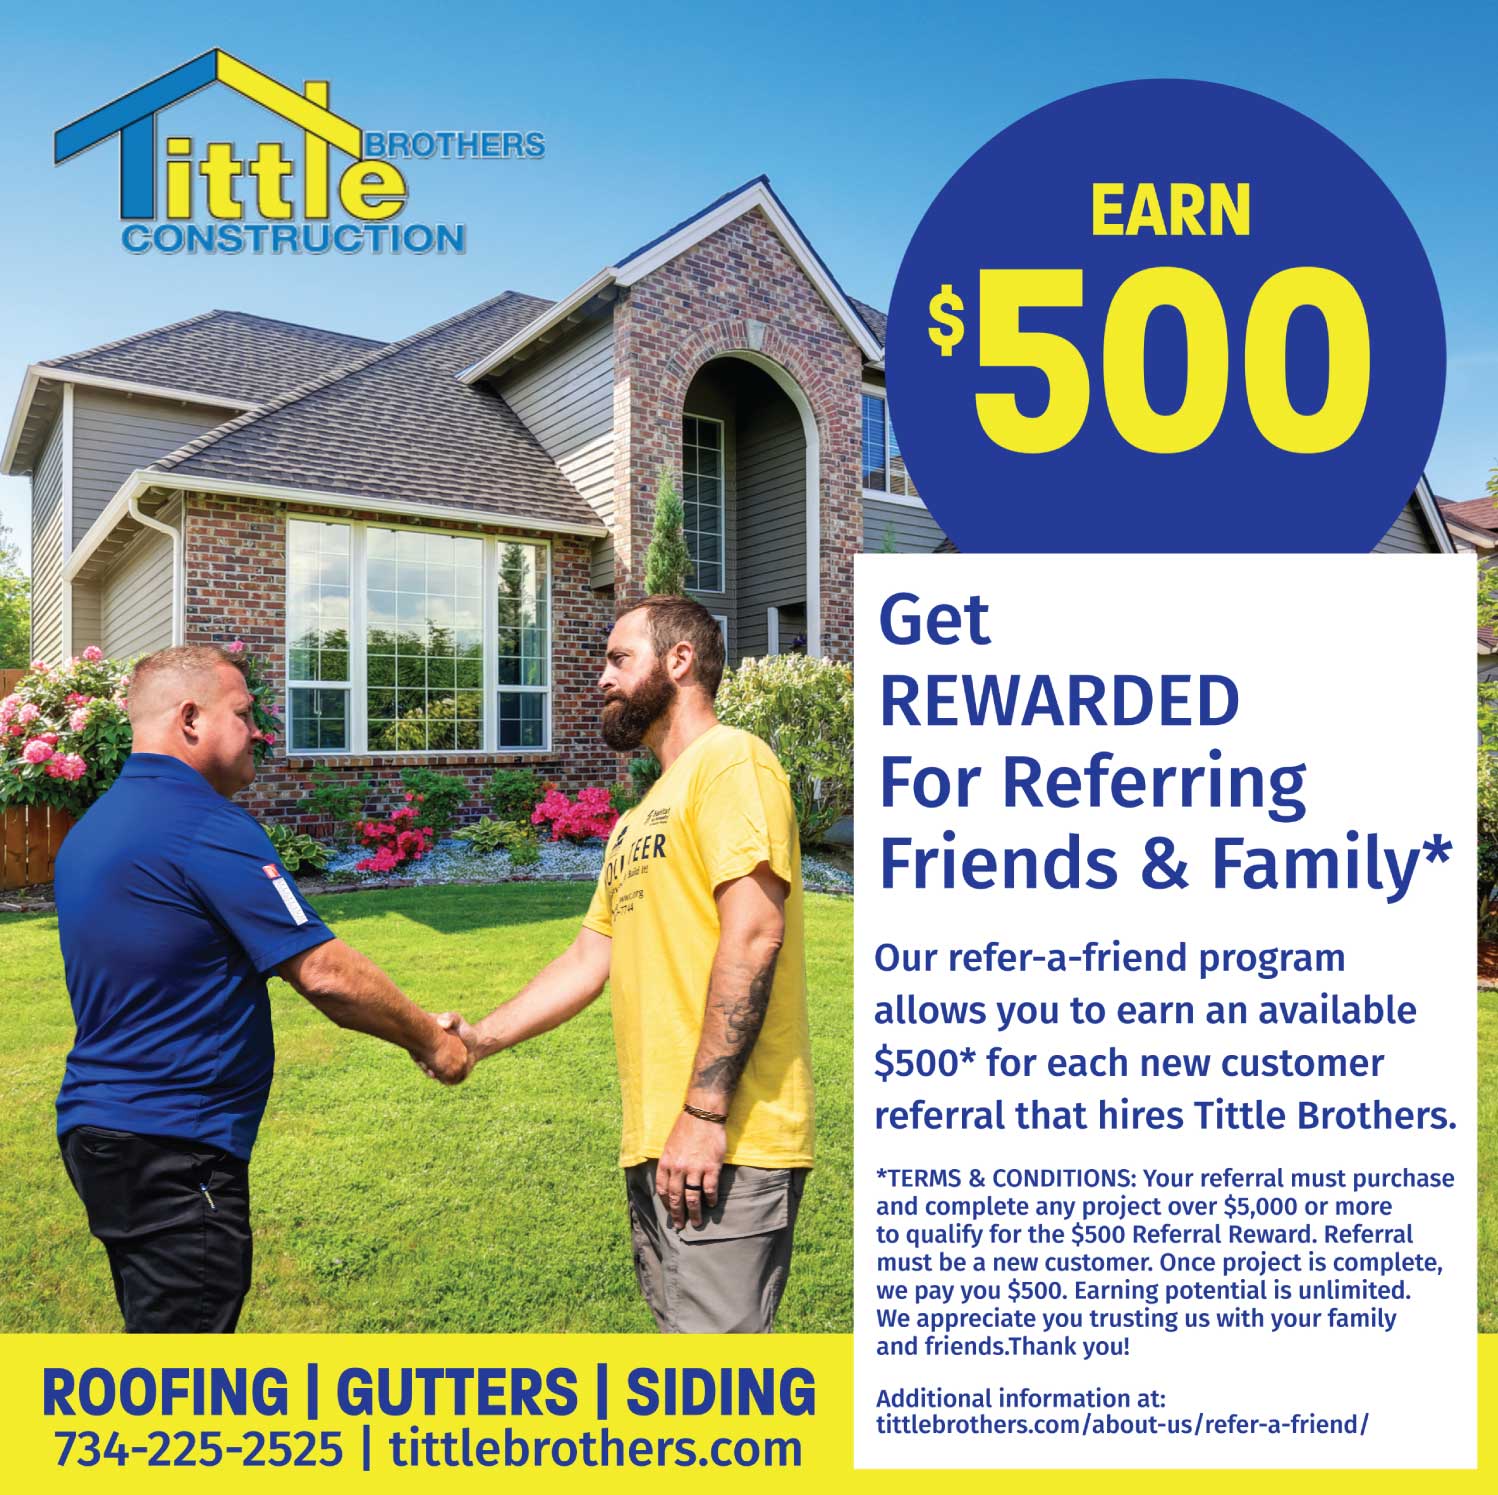 Refer a Friend and Be Rewarded